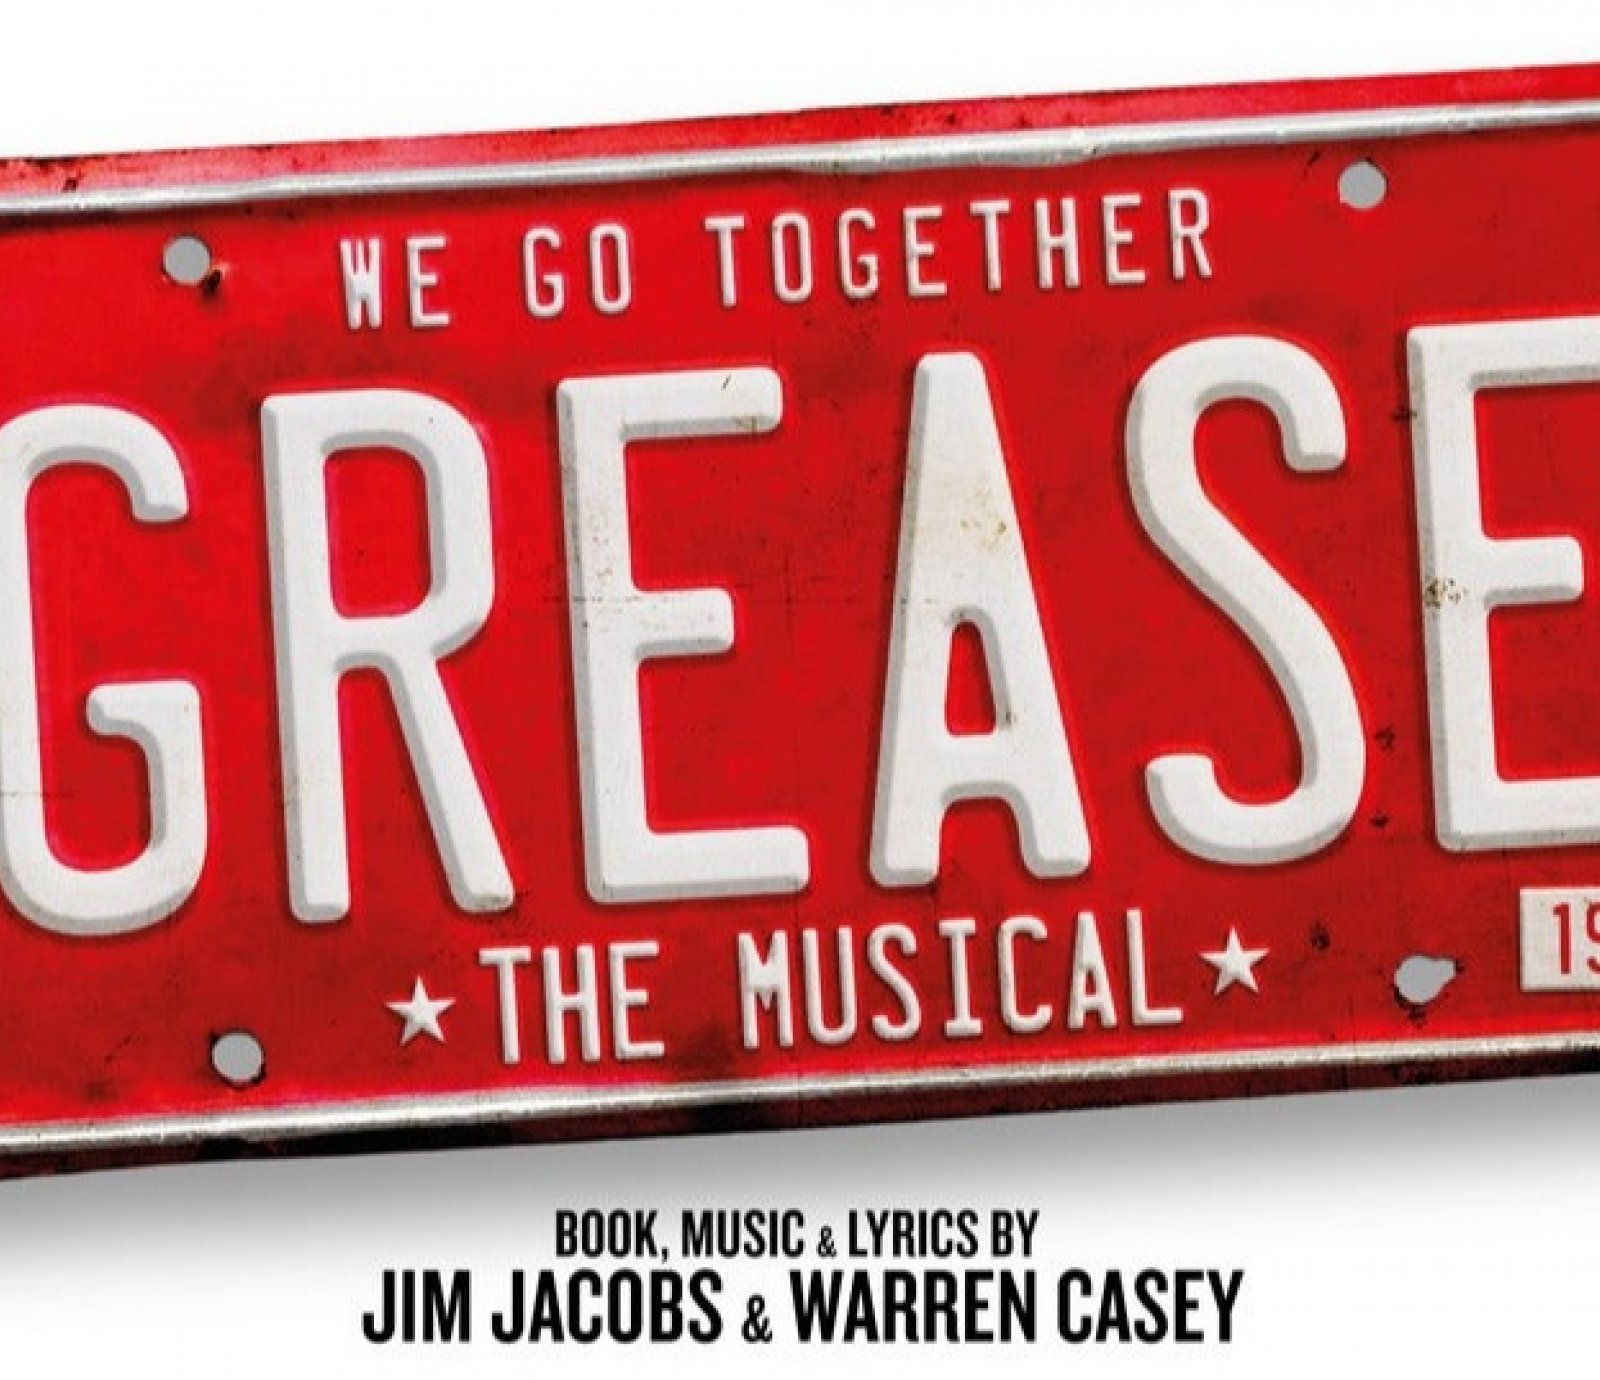 Grease the Musical (London)